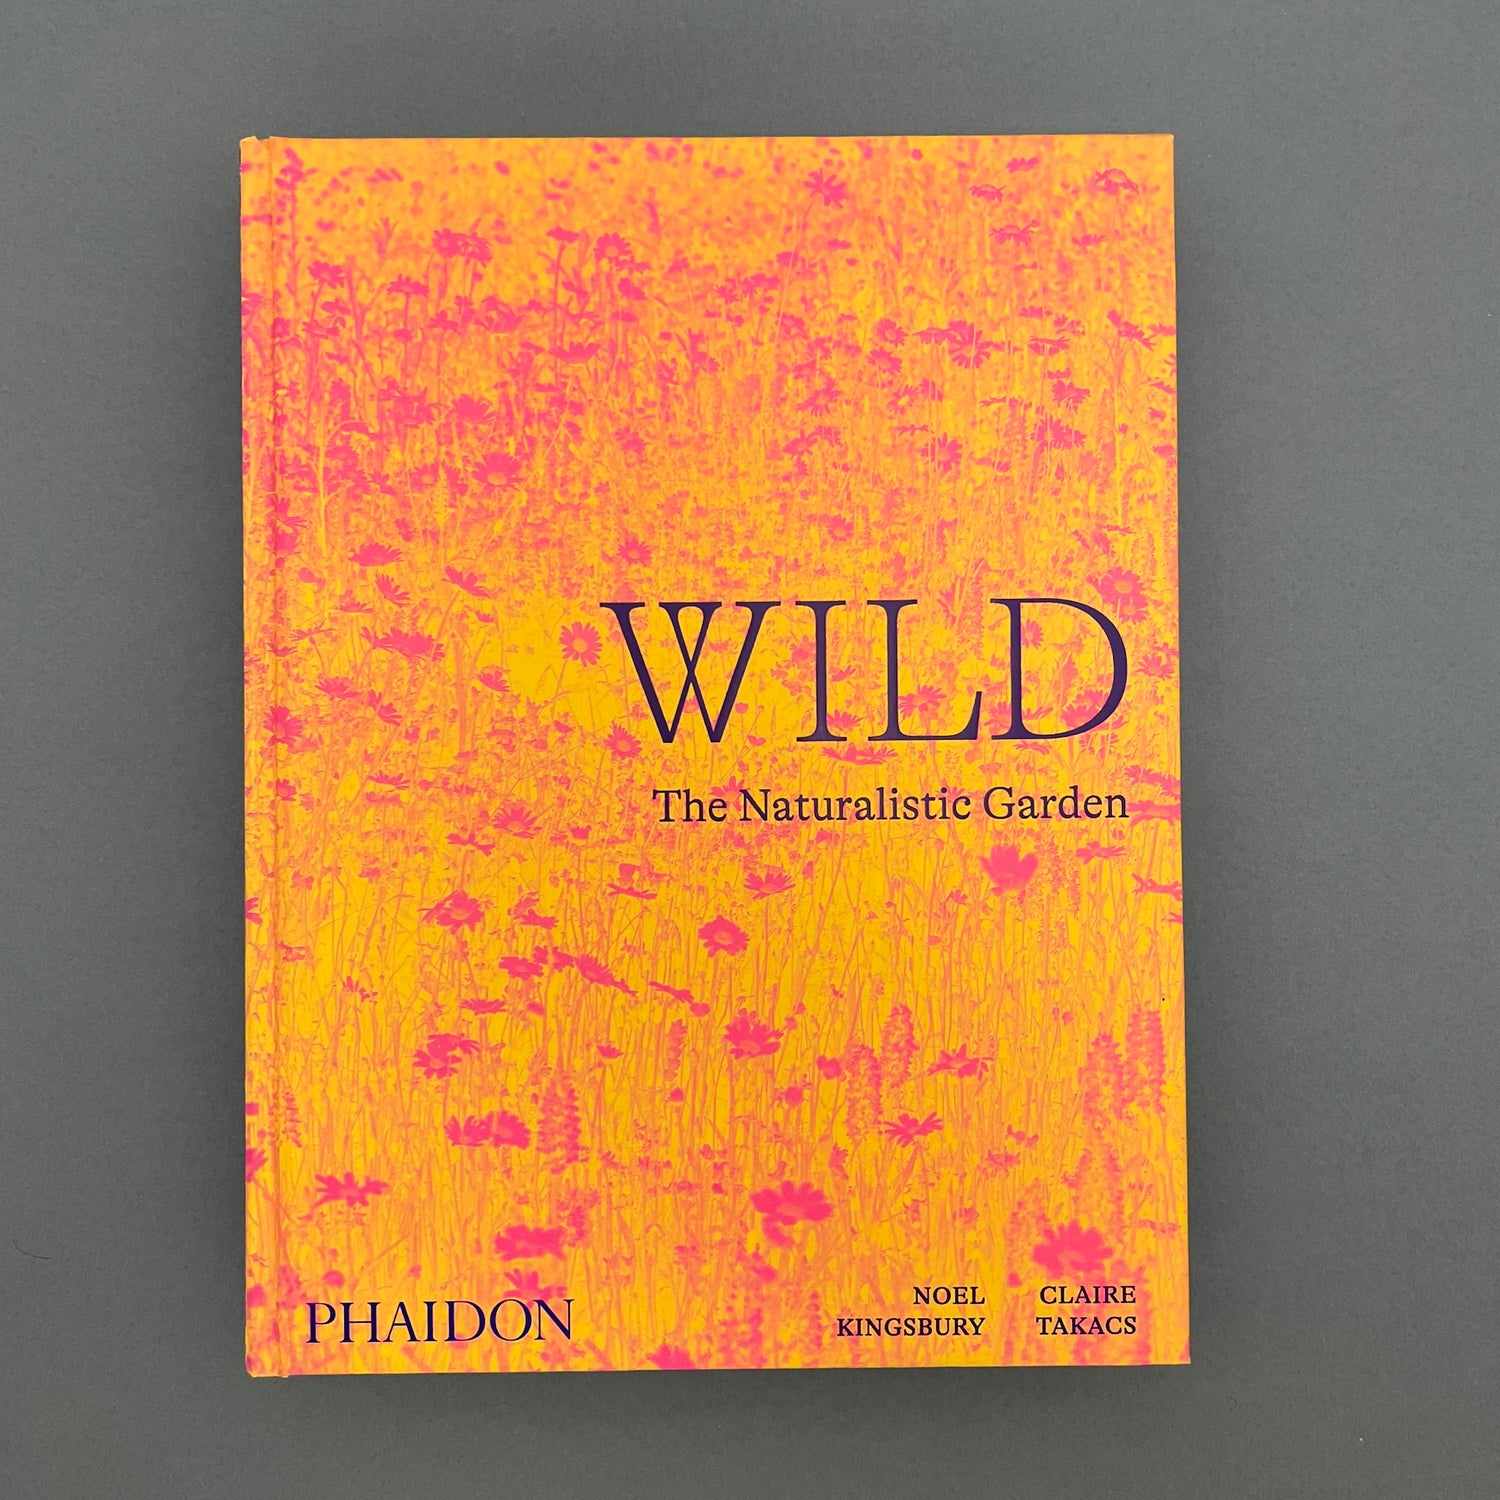 A book called "Wild The Naturalistic garden" with a yellow and pink flower field as the cover